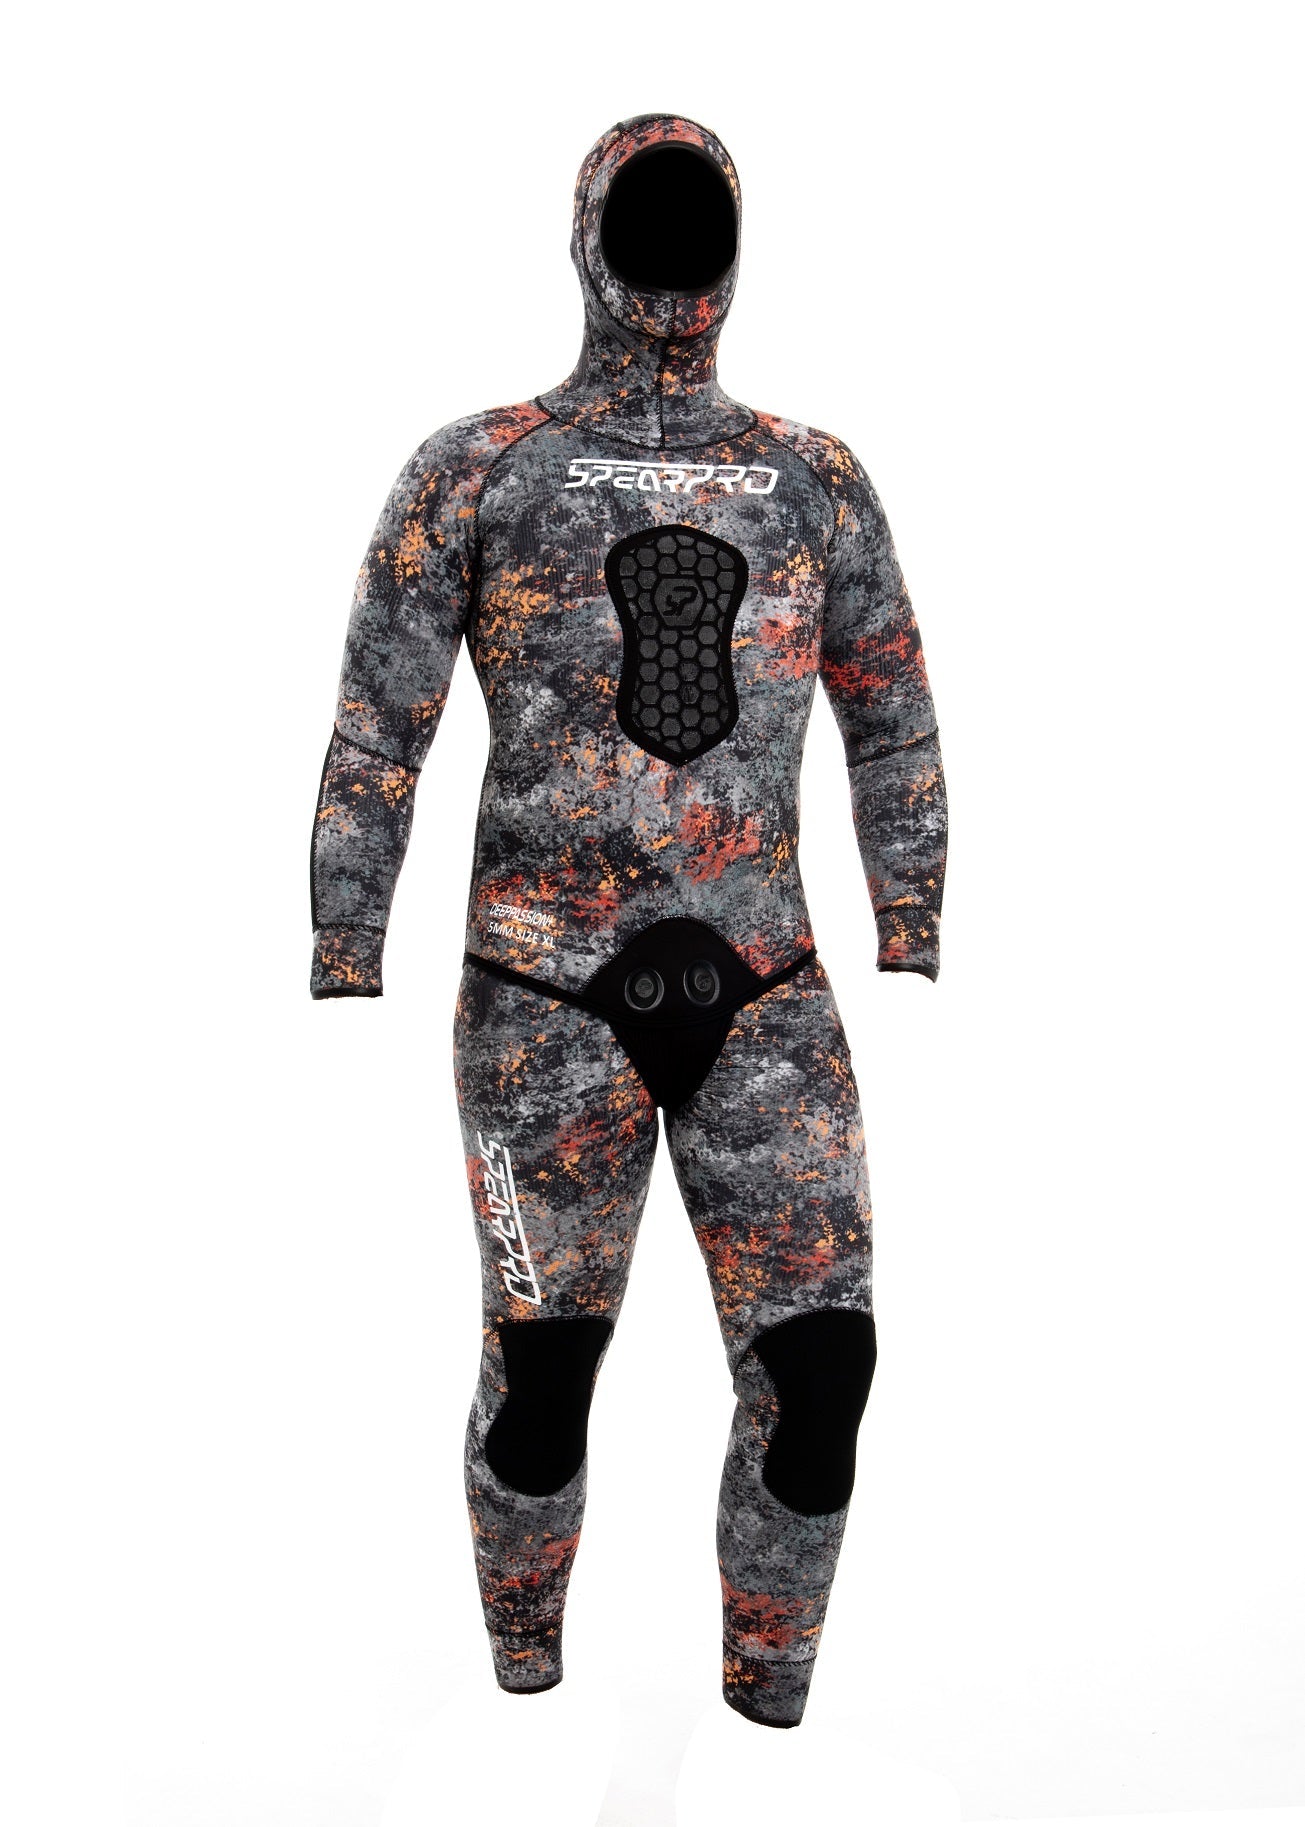 SpearPro Deep Passion Grey 1.5mm wetsuit - American Dive Company